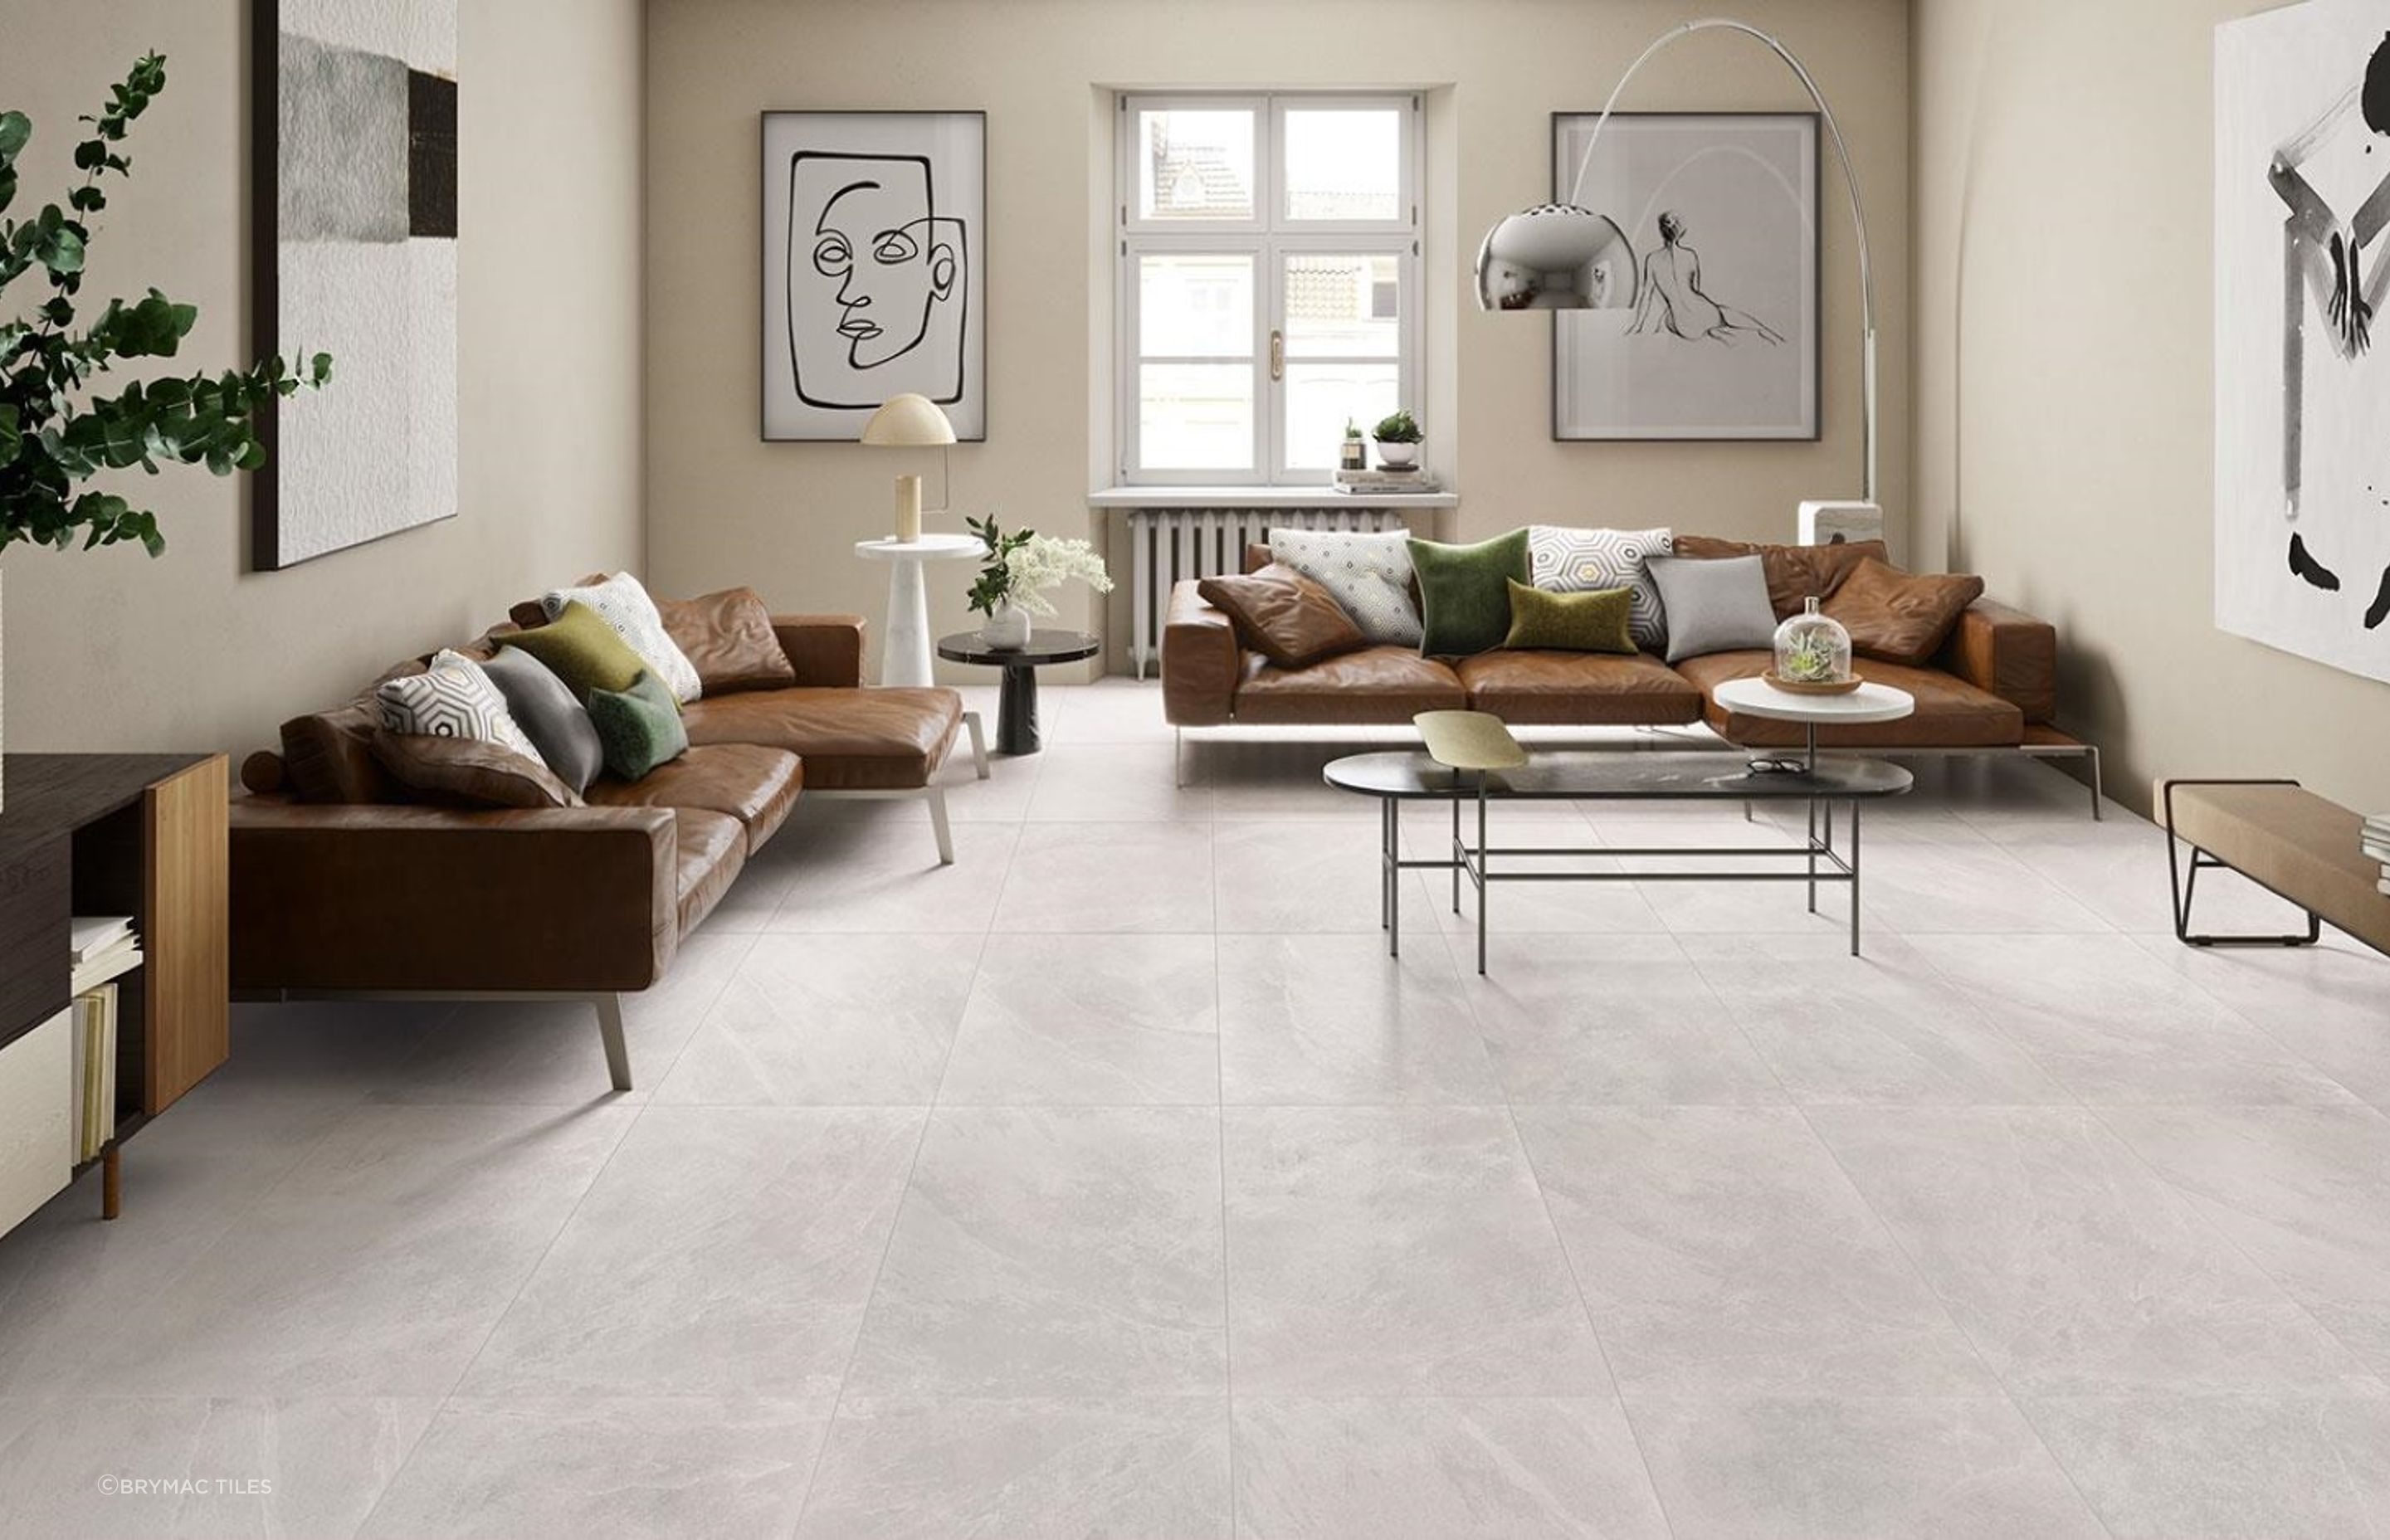 Large tiles like the Gentle Stone-Marble by Ascot add a seamless quality to a living space.